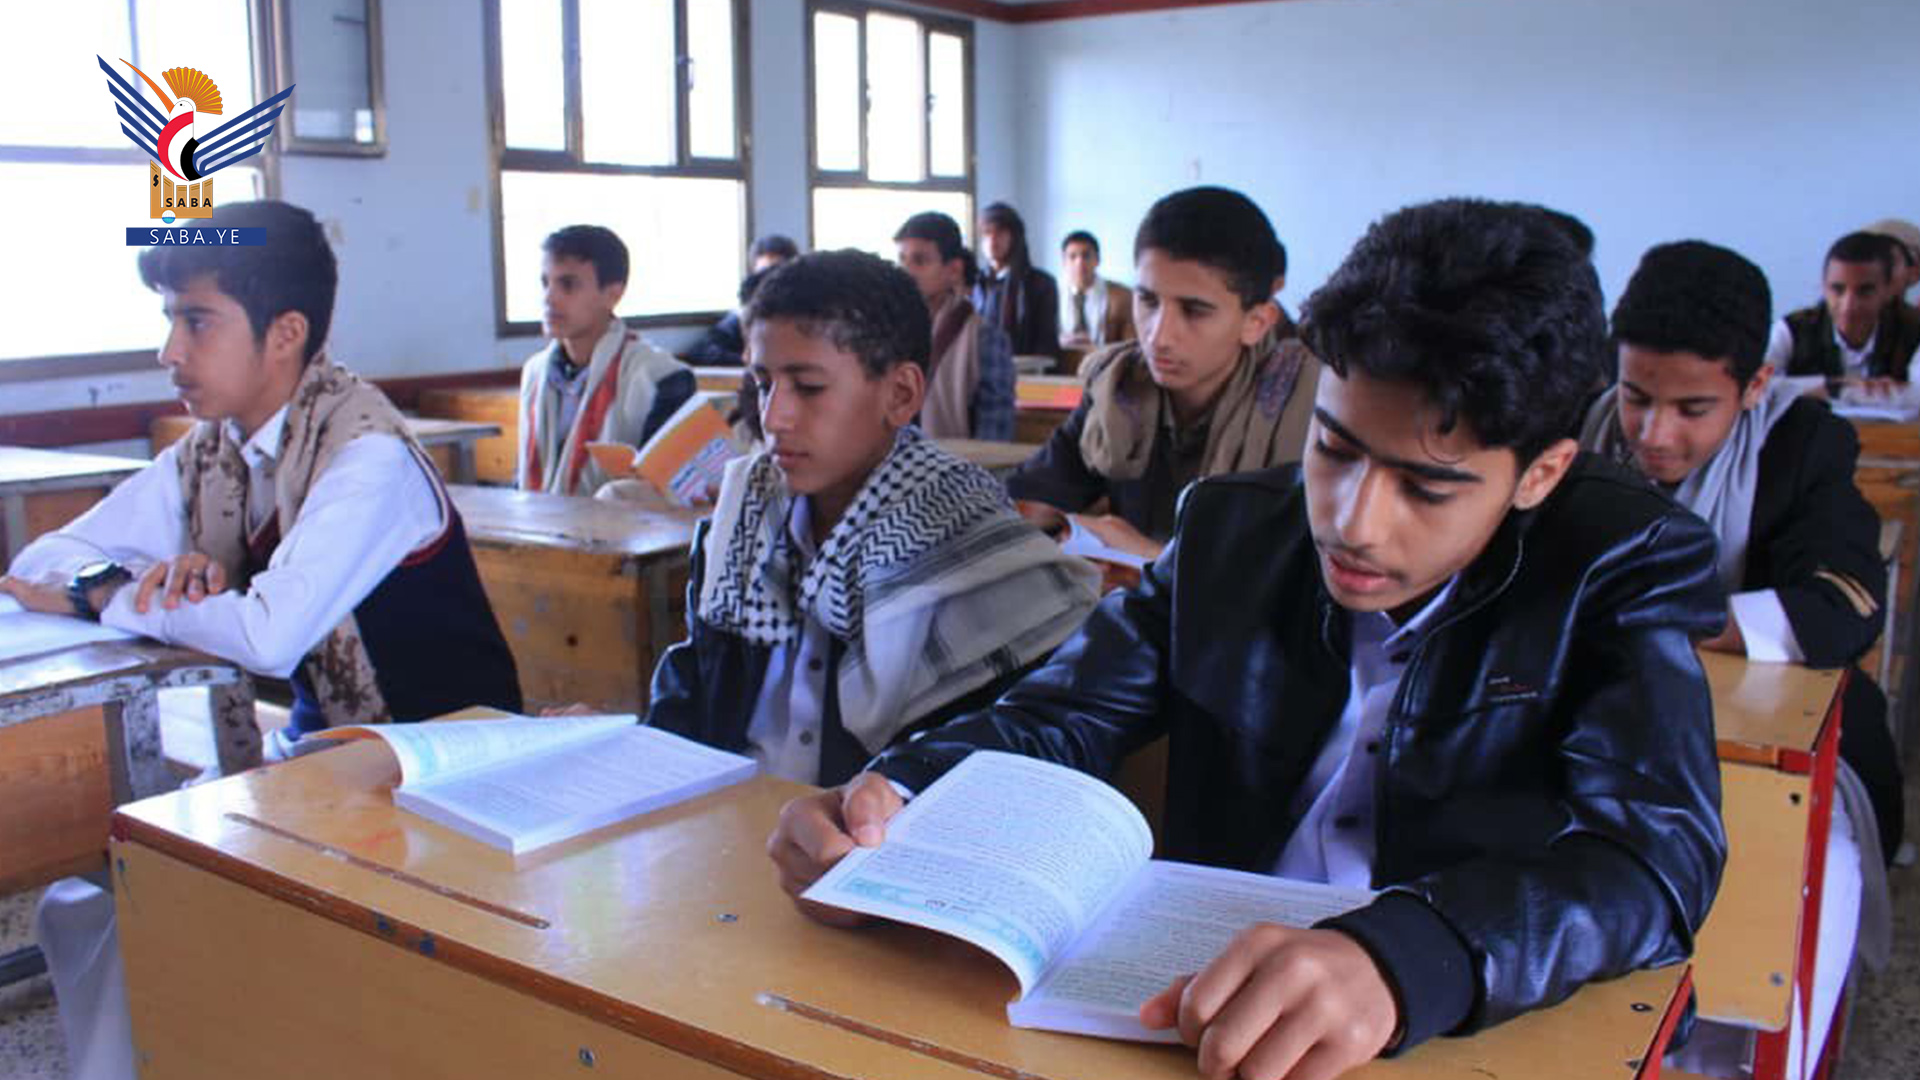 Summer courses in Sana'a.. Turnout that exceeded expectations to immunize generations